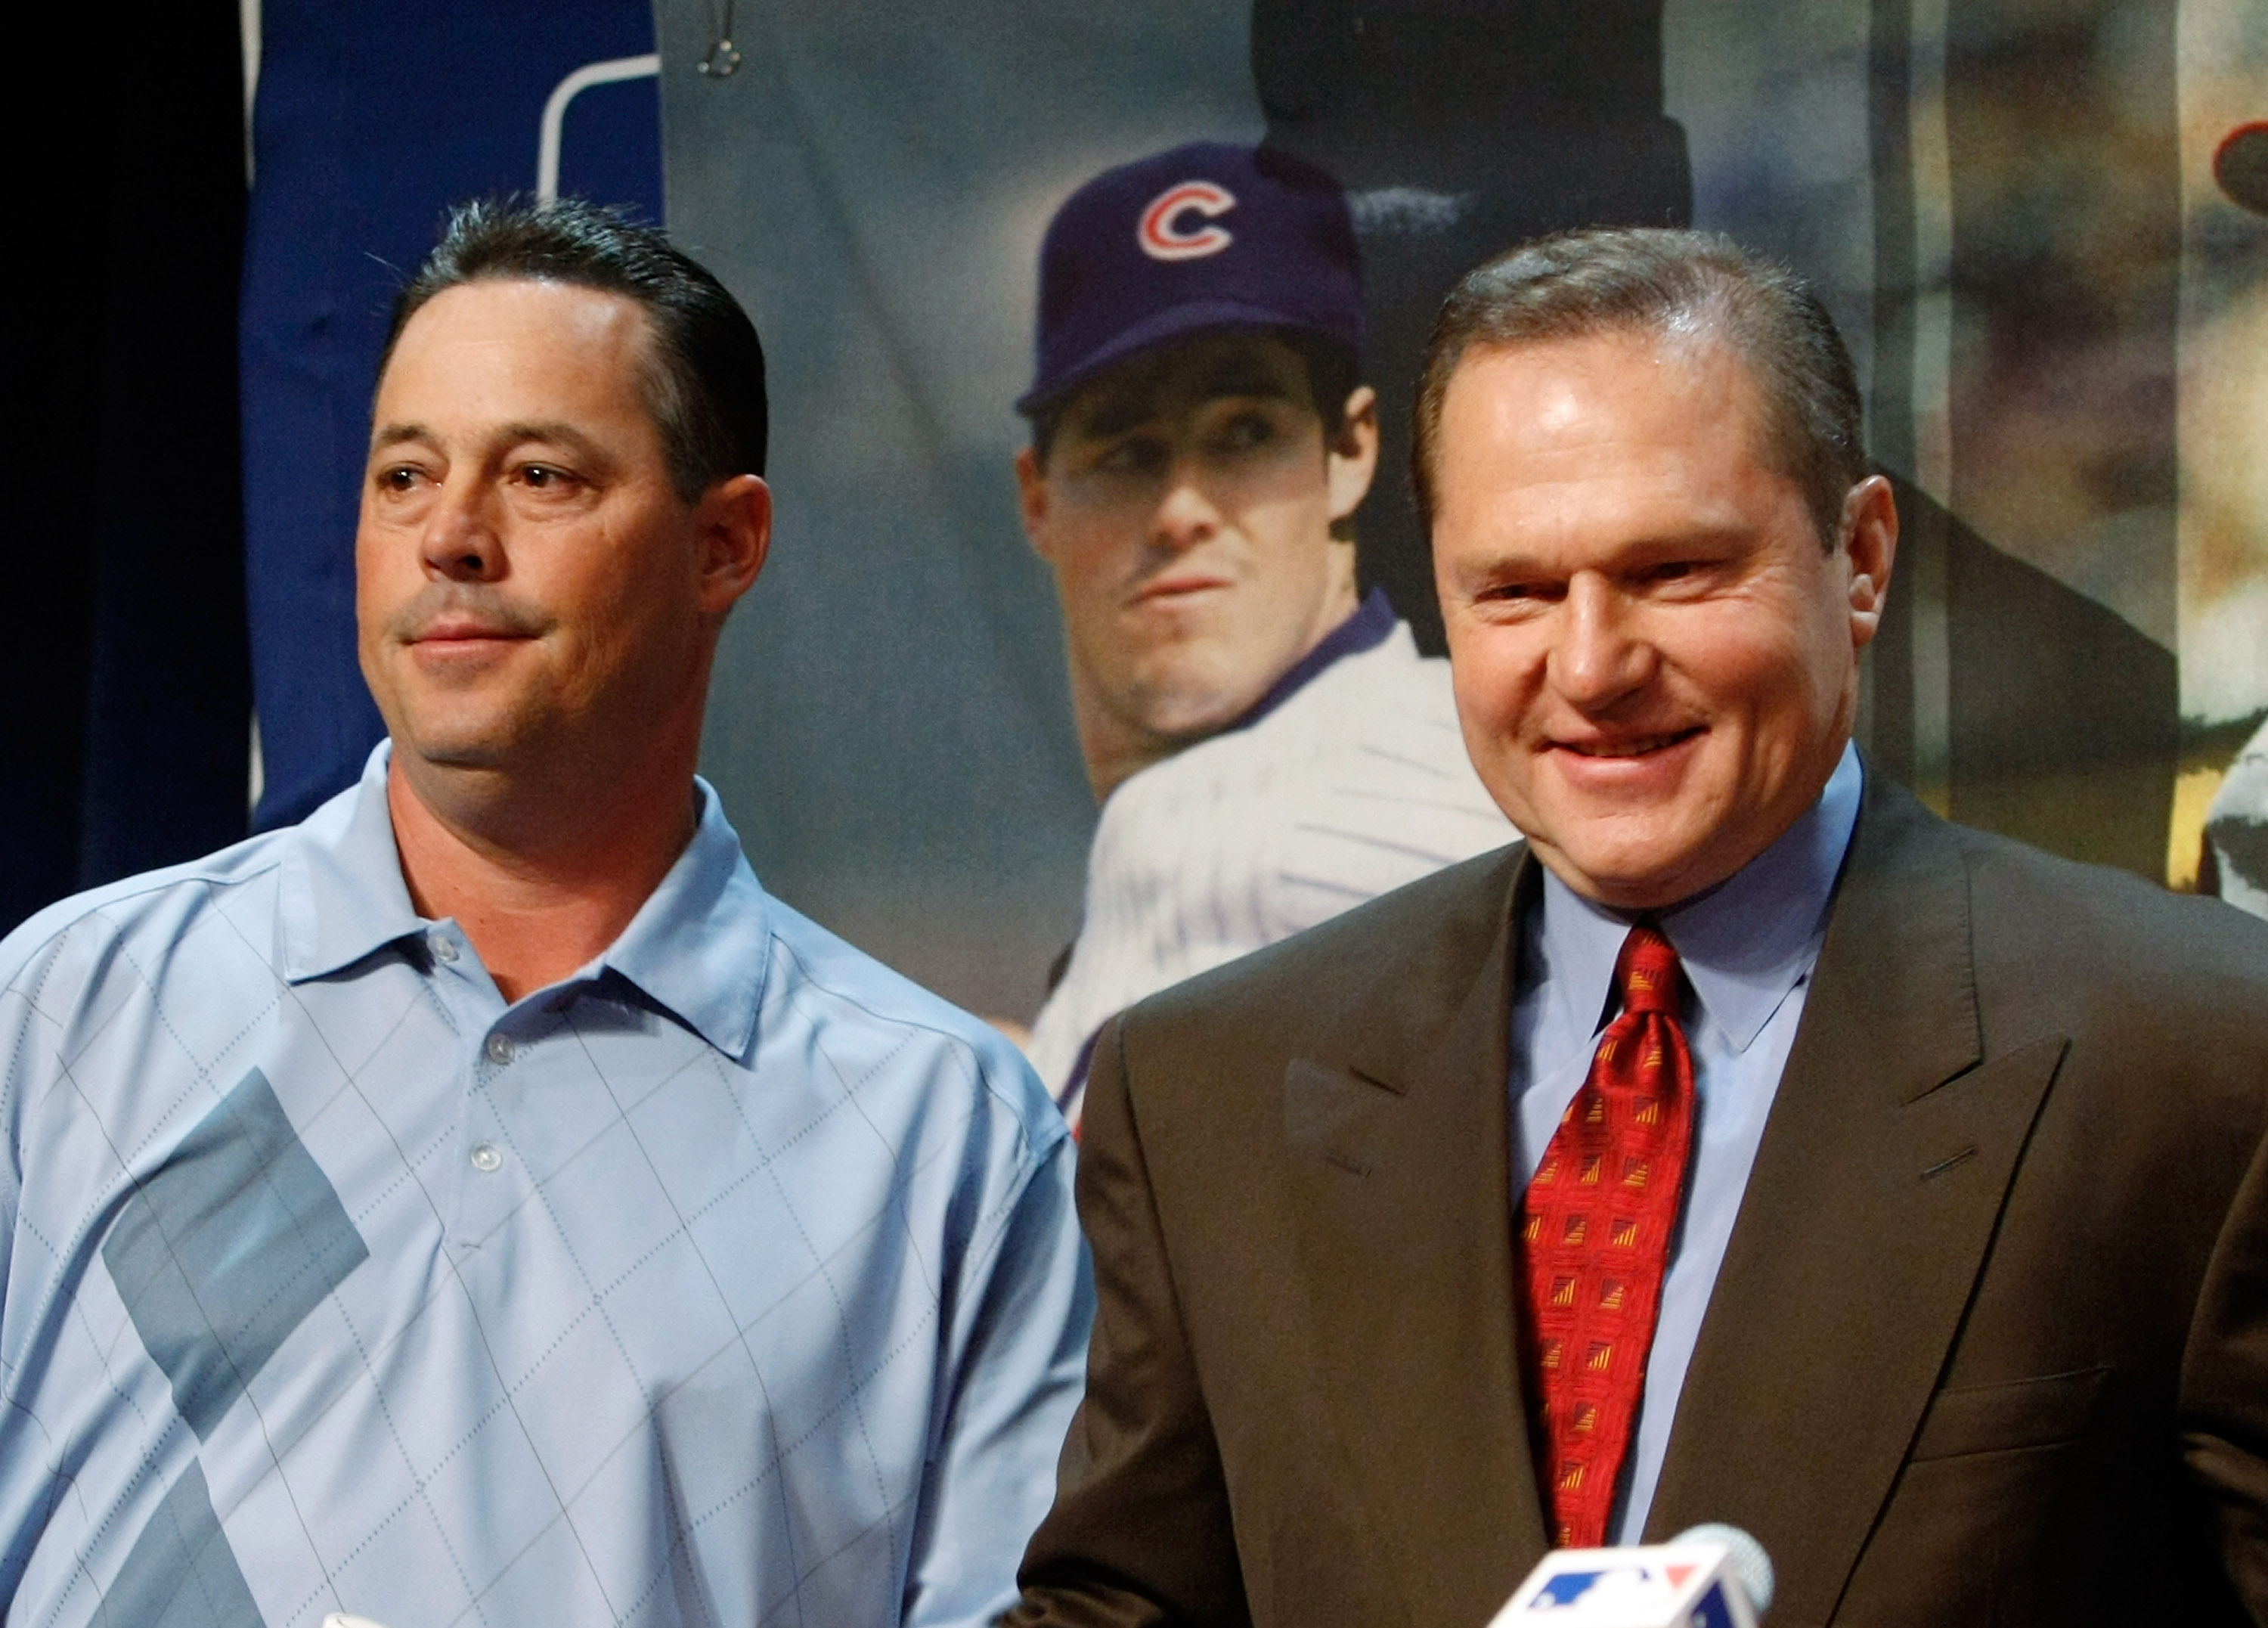 Chicago Cubs general manager Jim Hendry (R) puts a jersey on